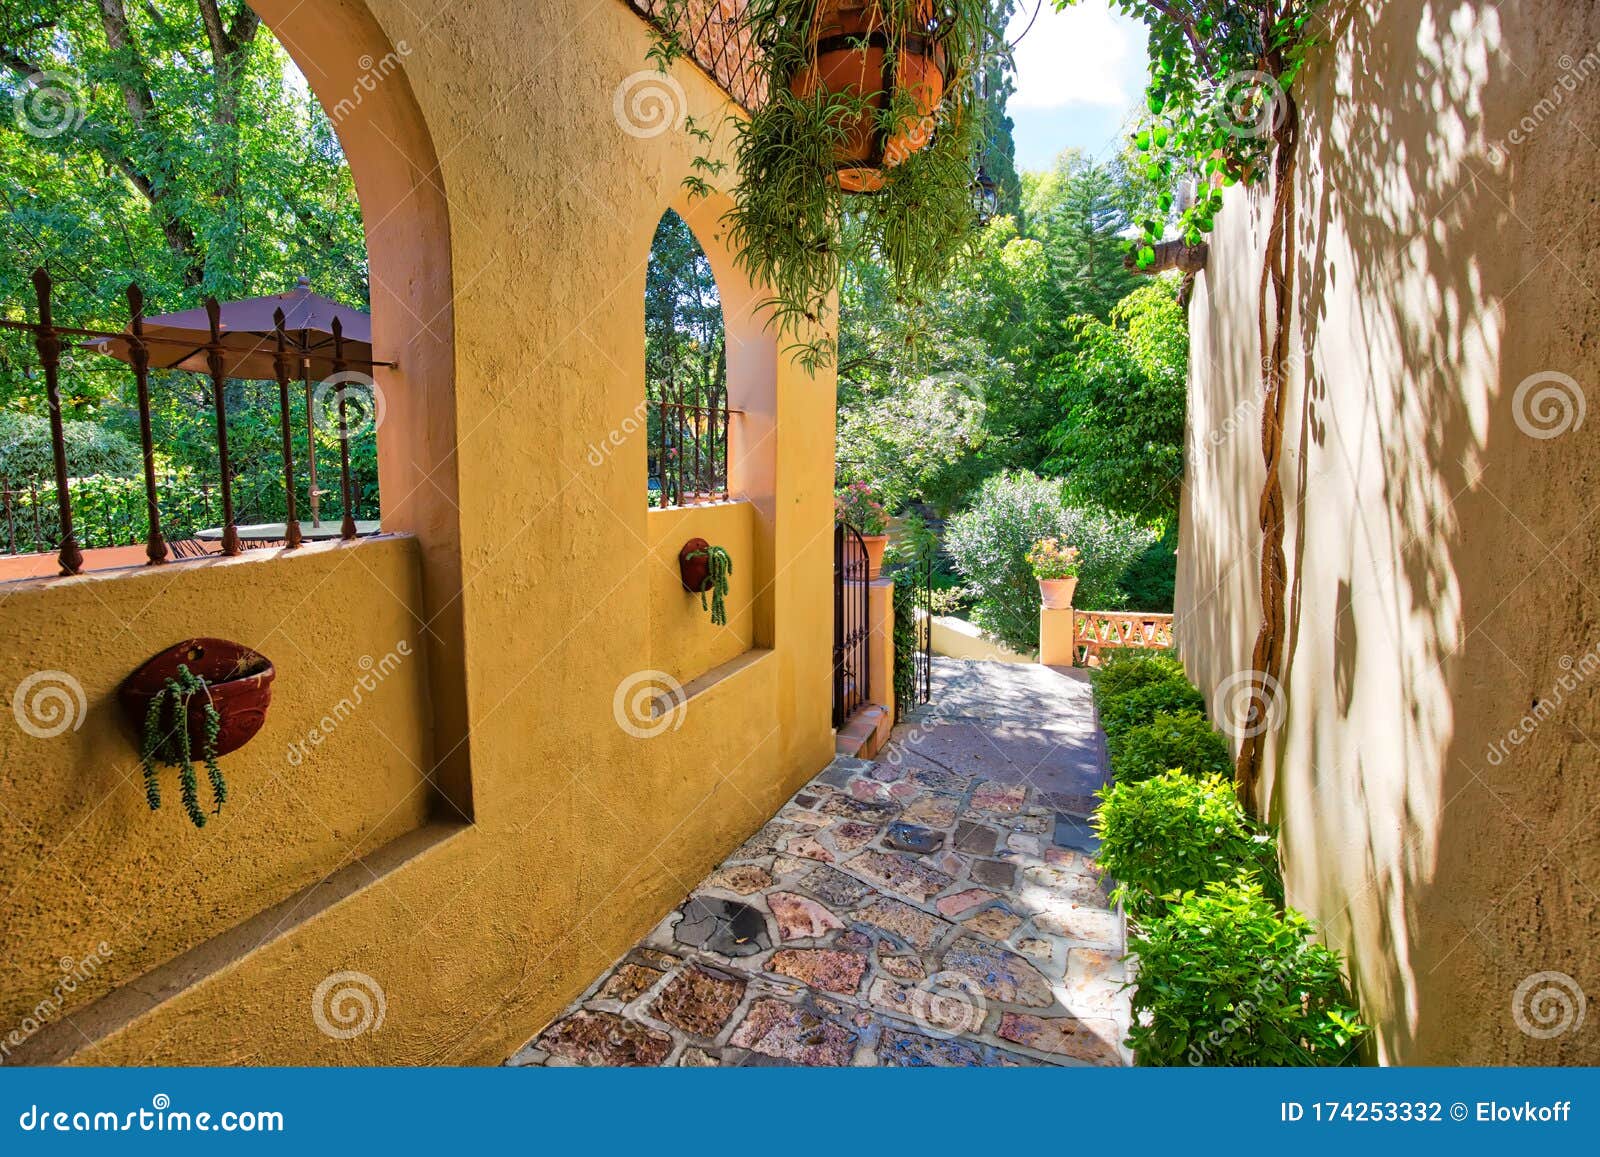 mexico, colorful buildings and streets of san miguel de allende in zona centro of historic city center